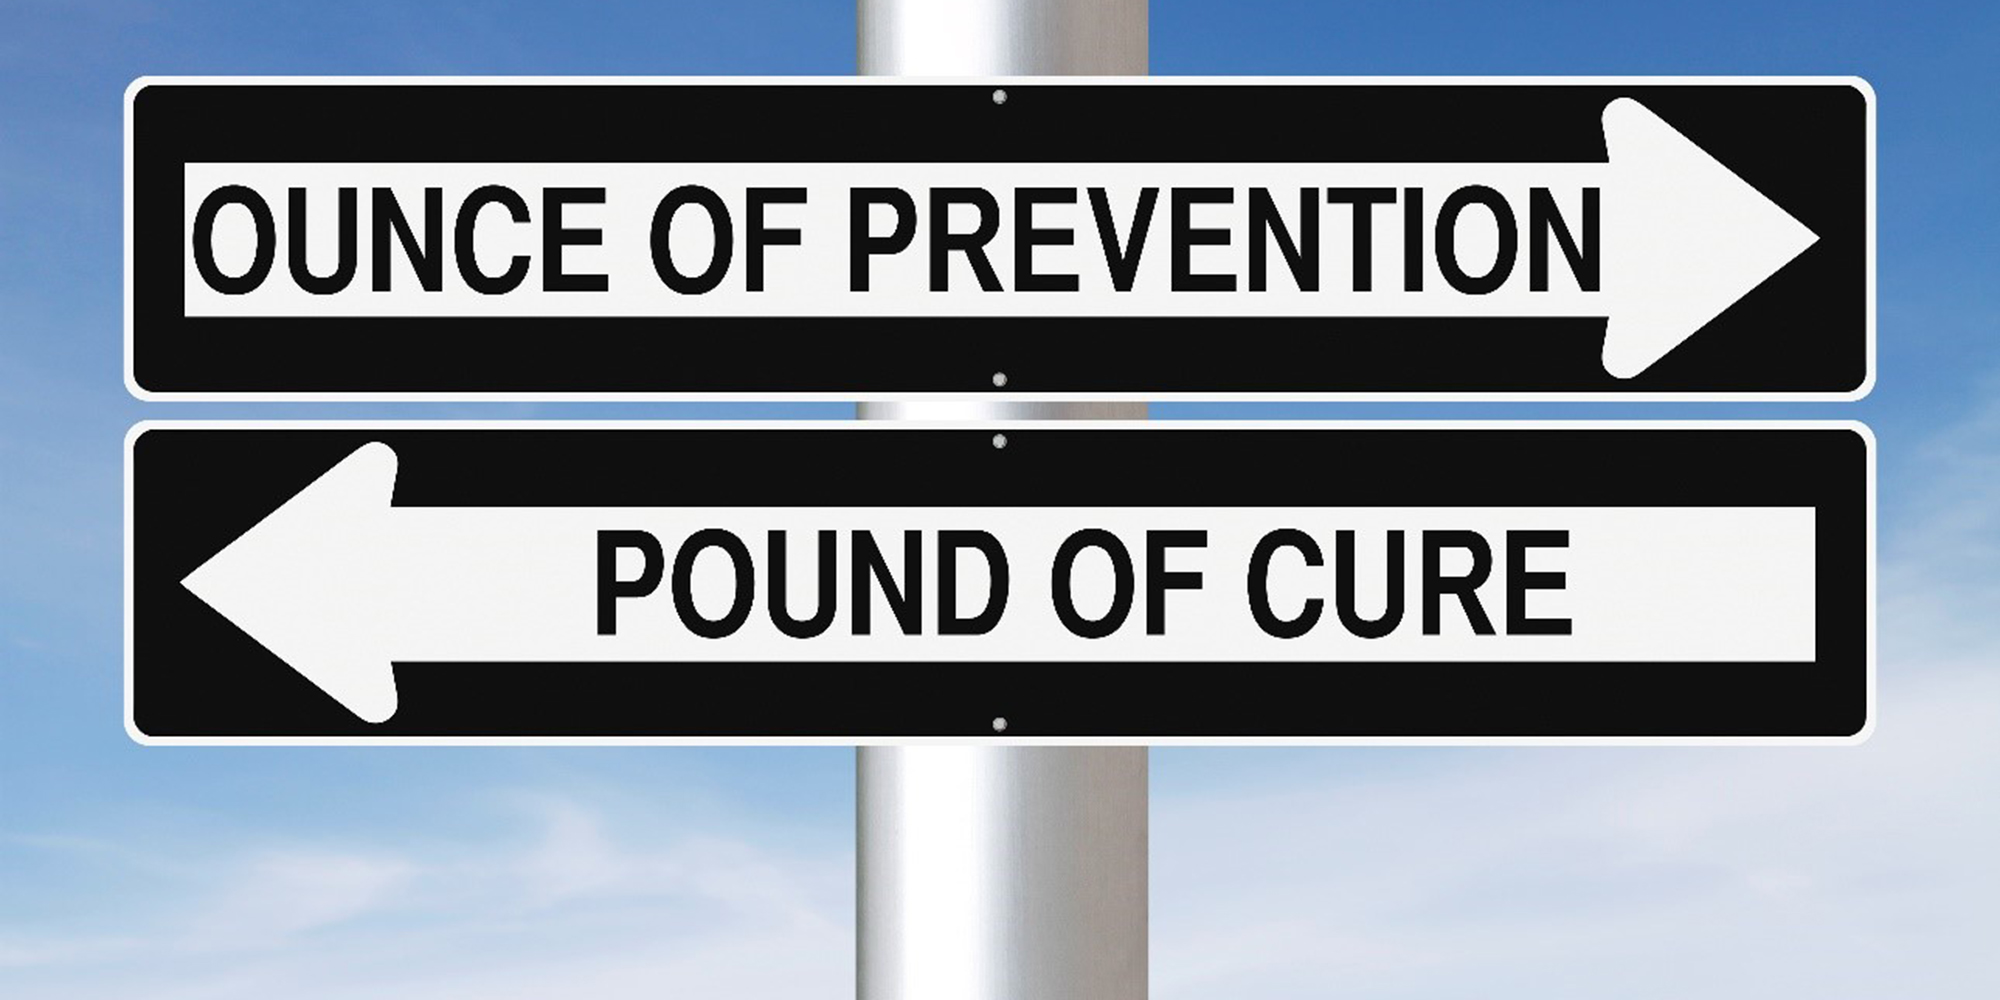 A sign that emphasizes the importance of preventive care benefits 